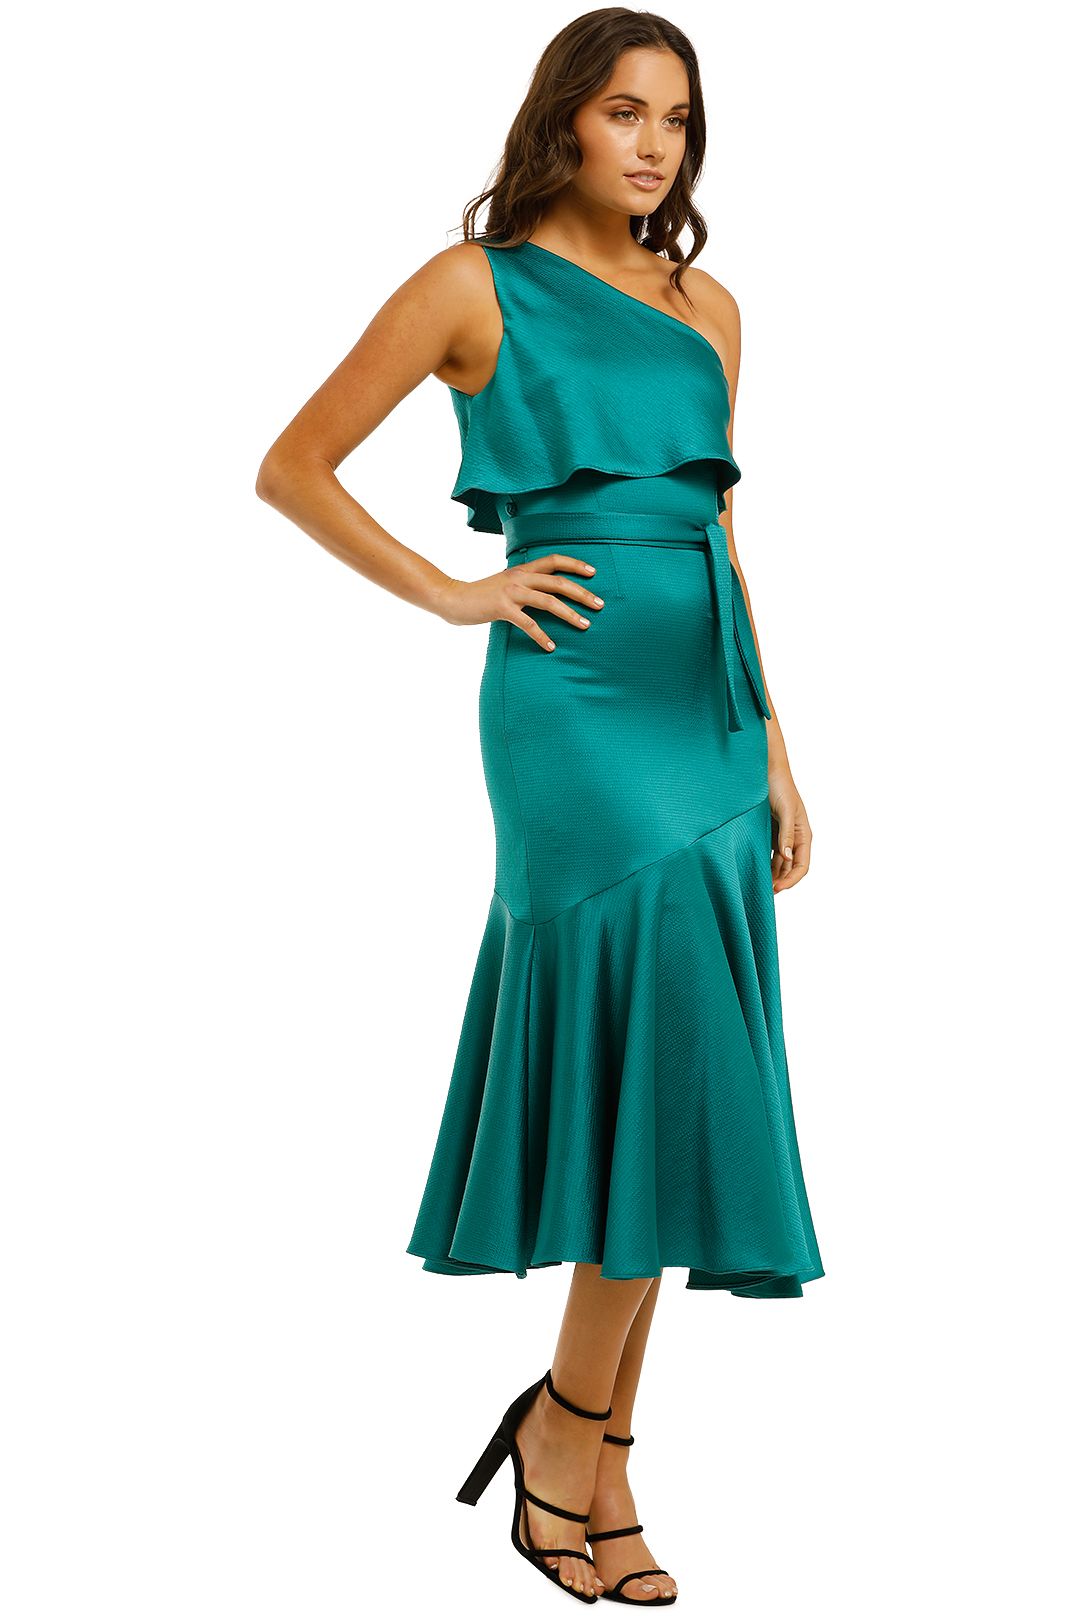 Oasis Asymmetry Midi Dress in Jade by Pasduchas for Hire | GlamCorner